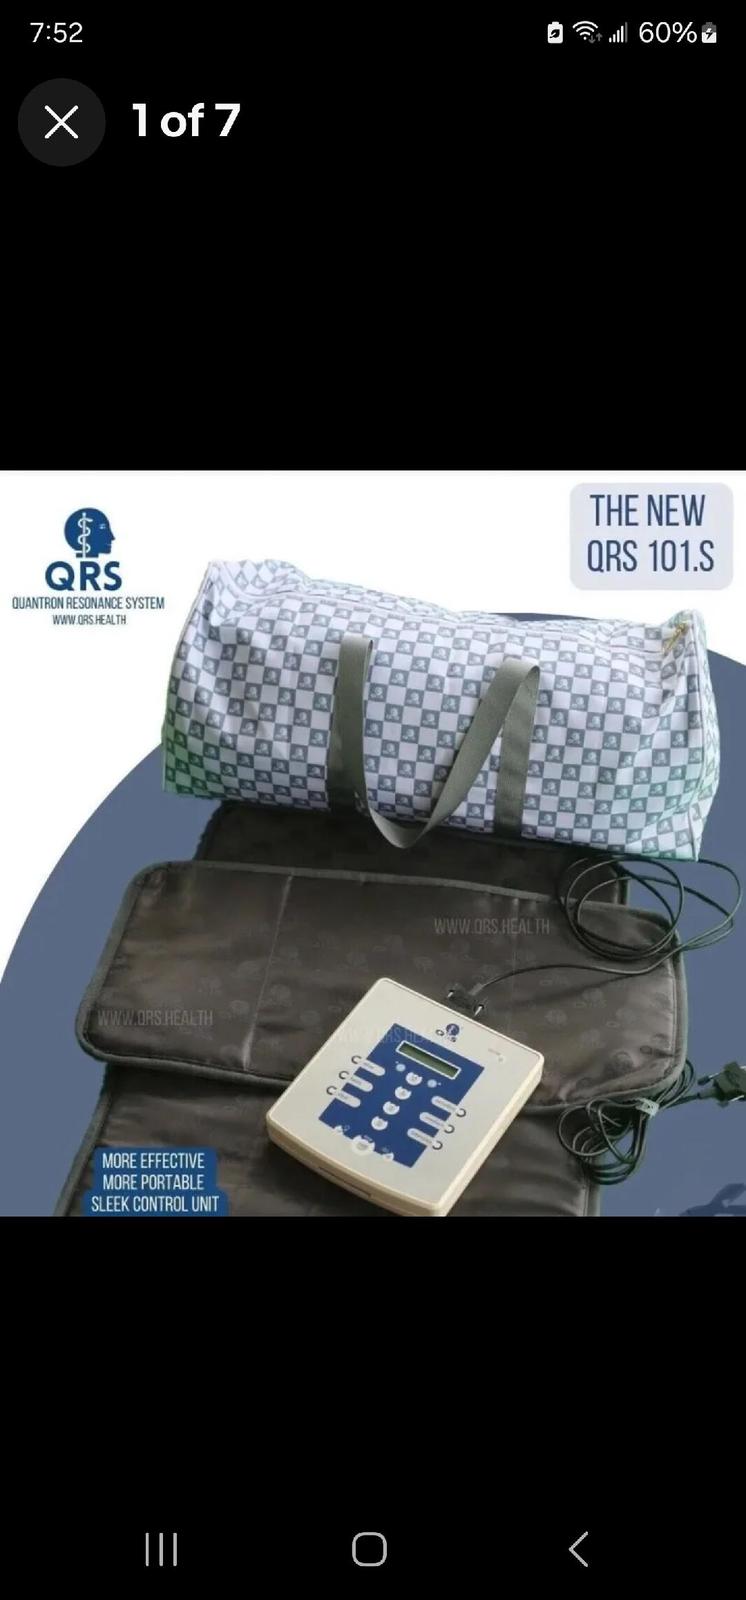 Primary image for NEW QRS 101 pemf mat - German made - 6 month real return policy - 